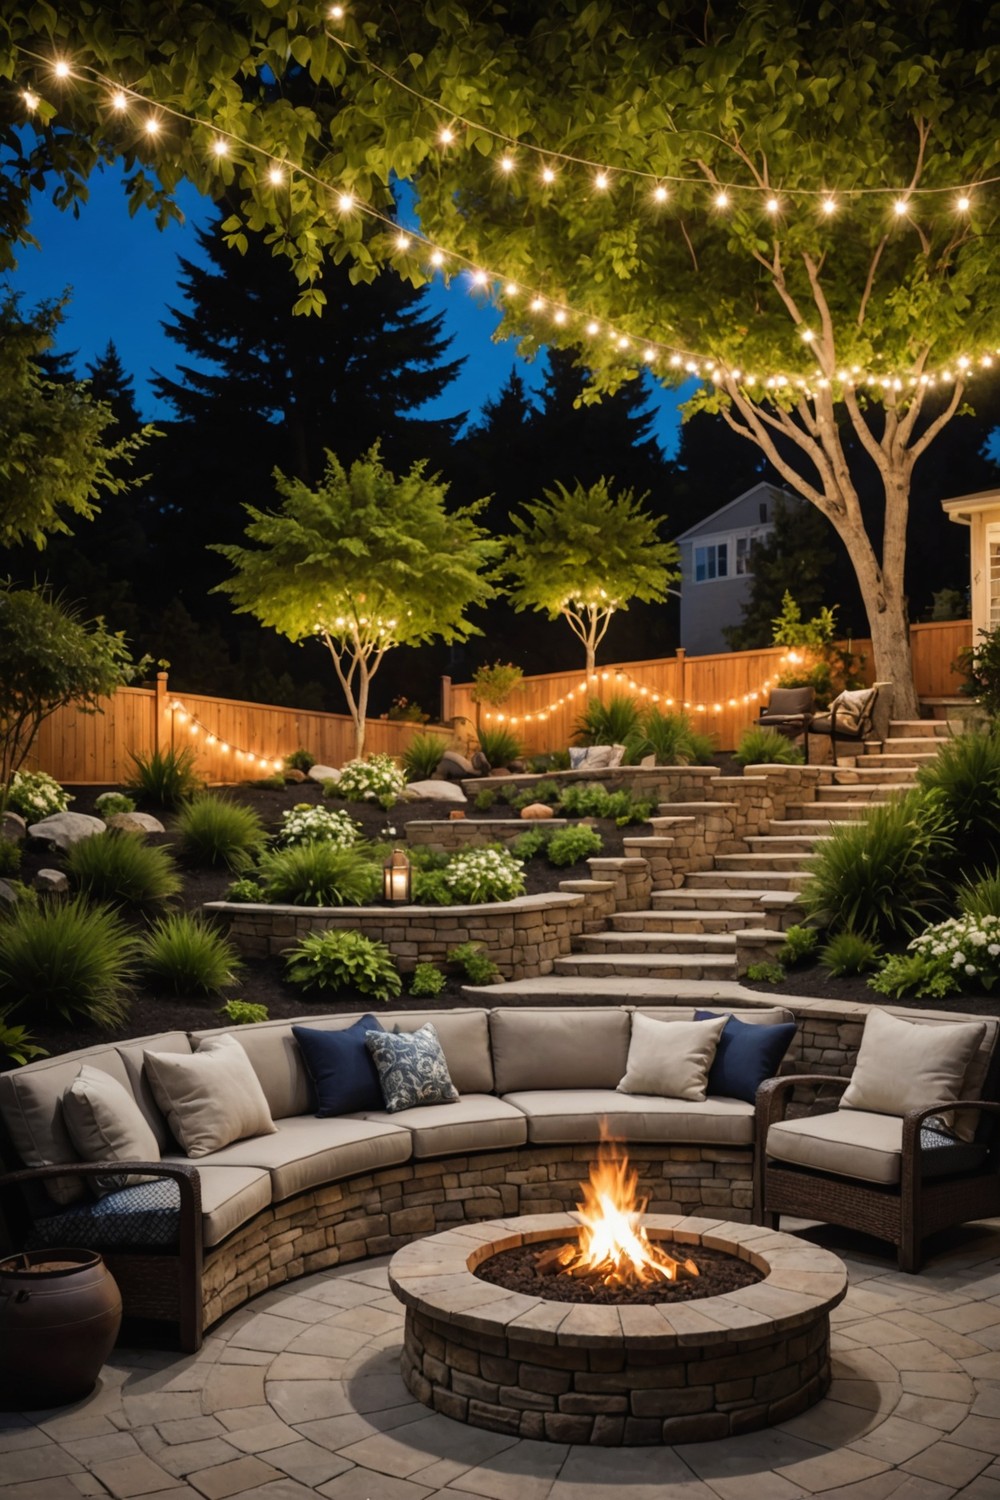 Retaining Wall with Built-in Fire Pit